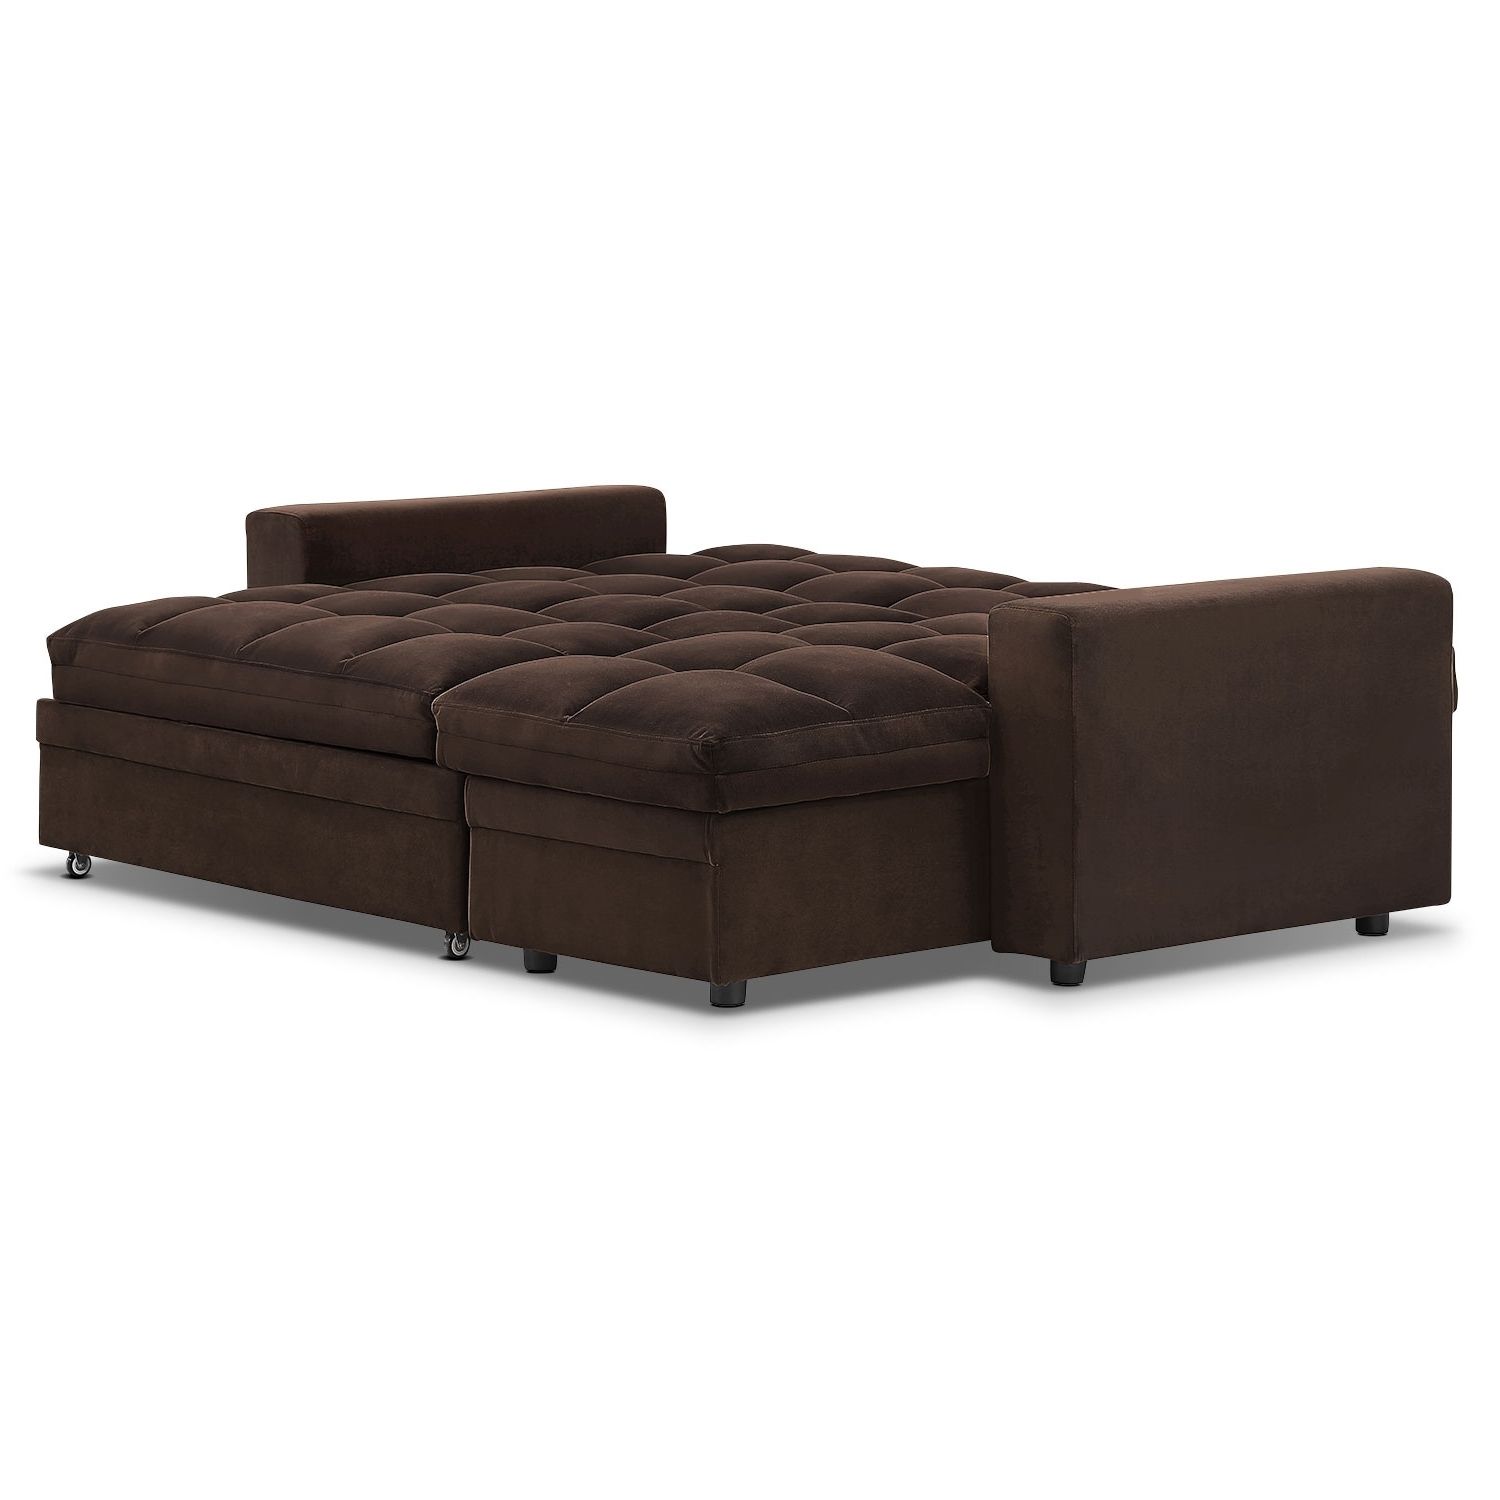 Value City Furniture Throughout Sofa Beds With Chaise (View 12 of 15)